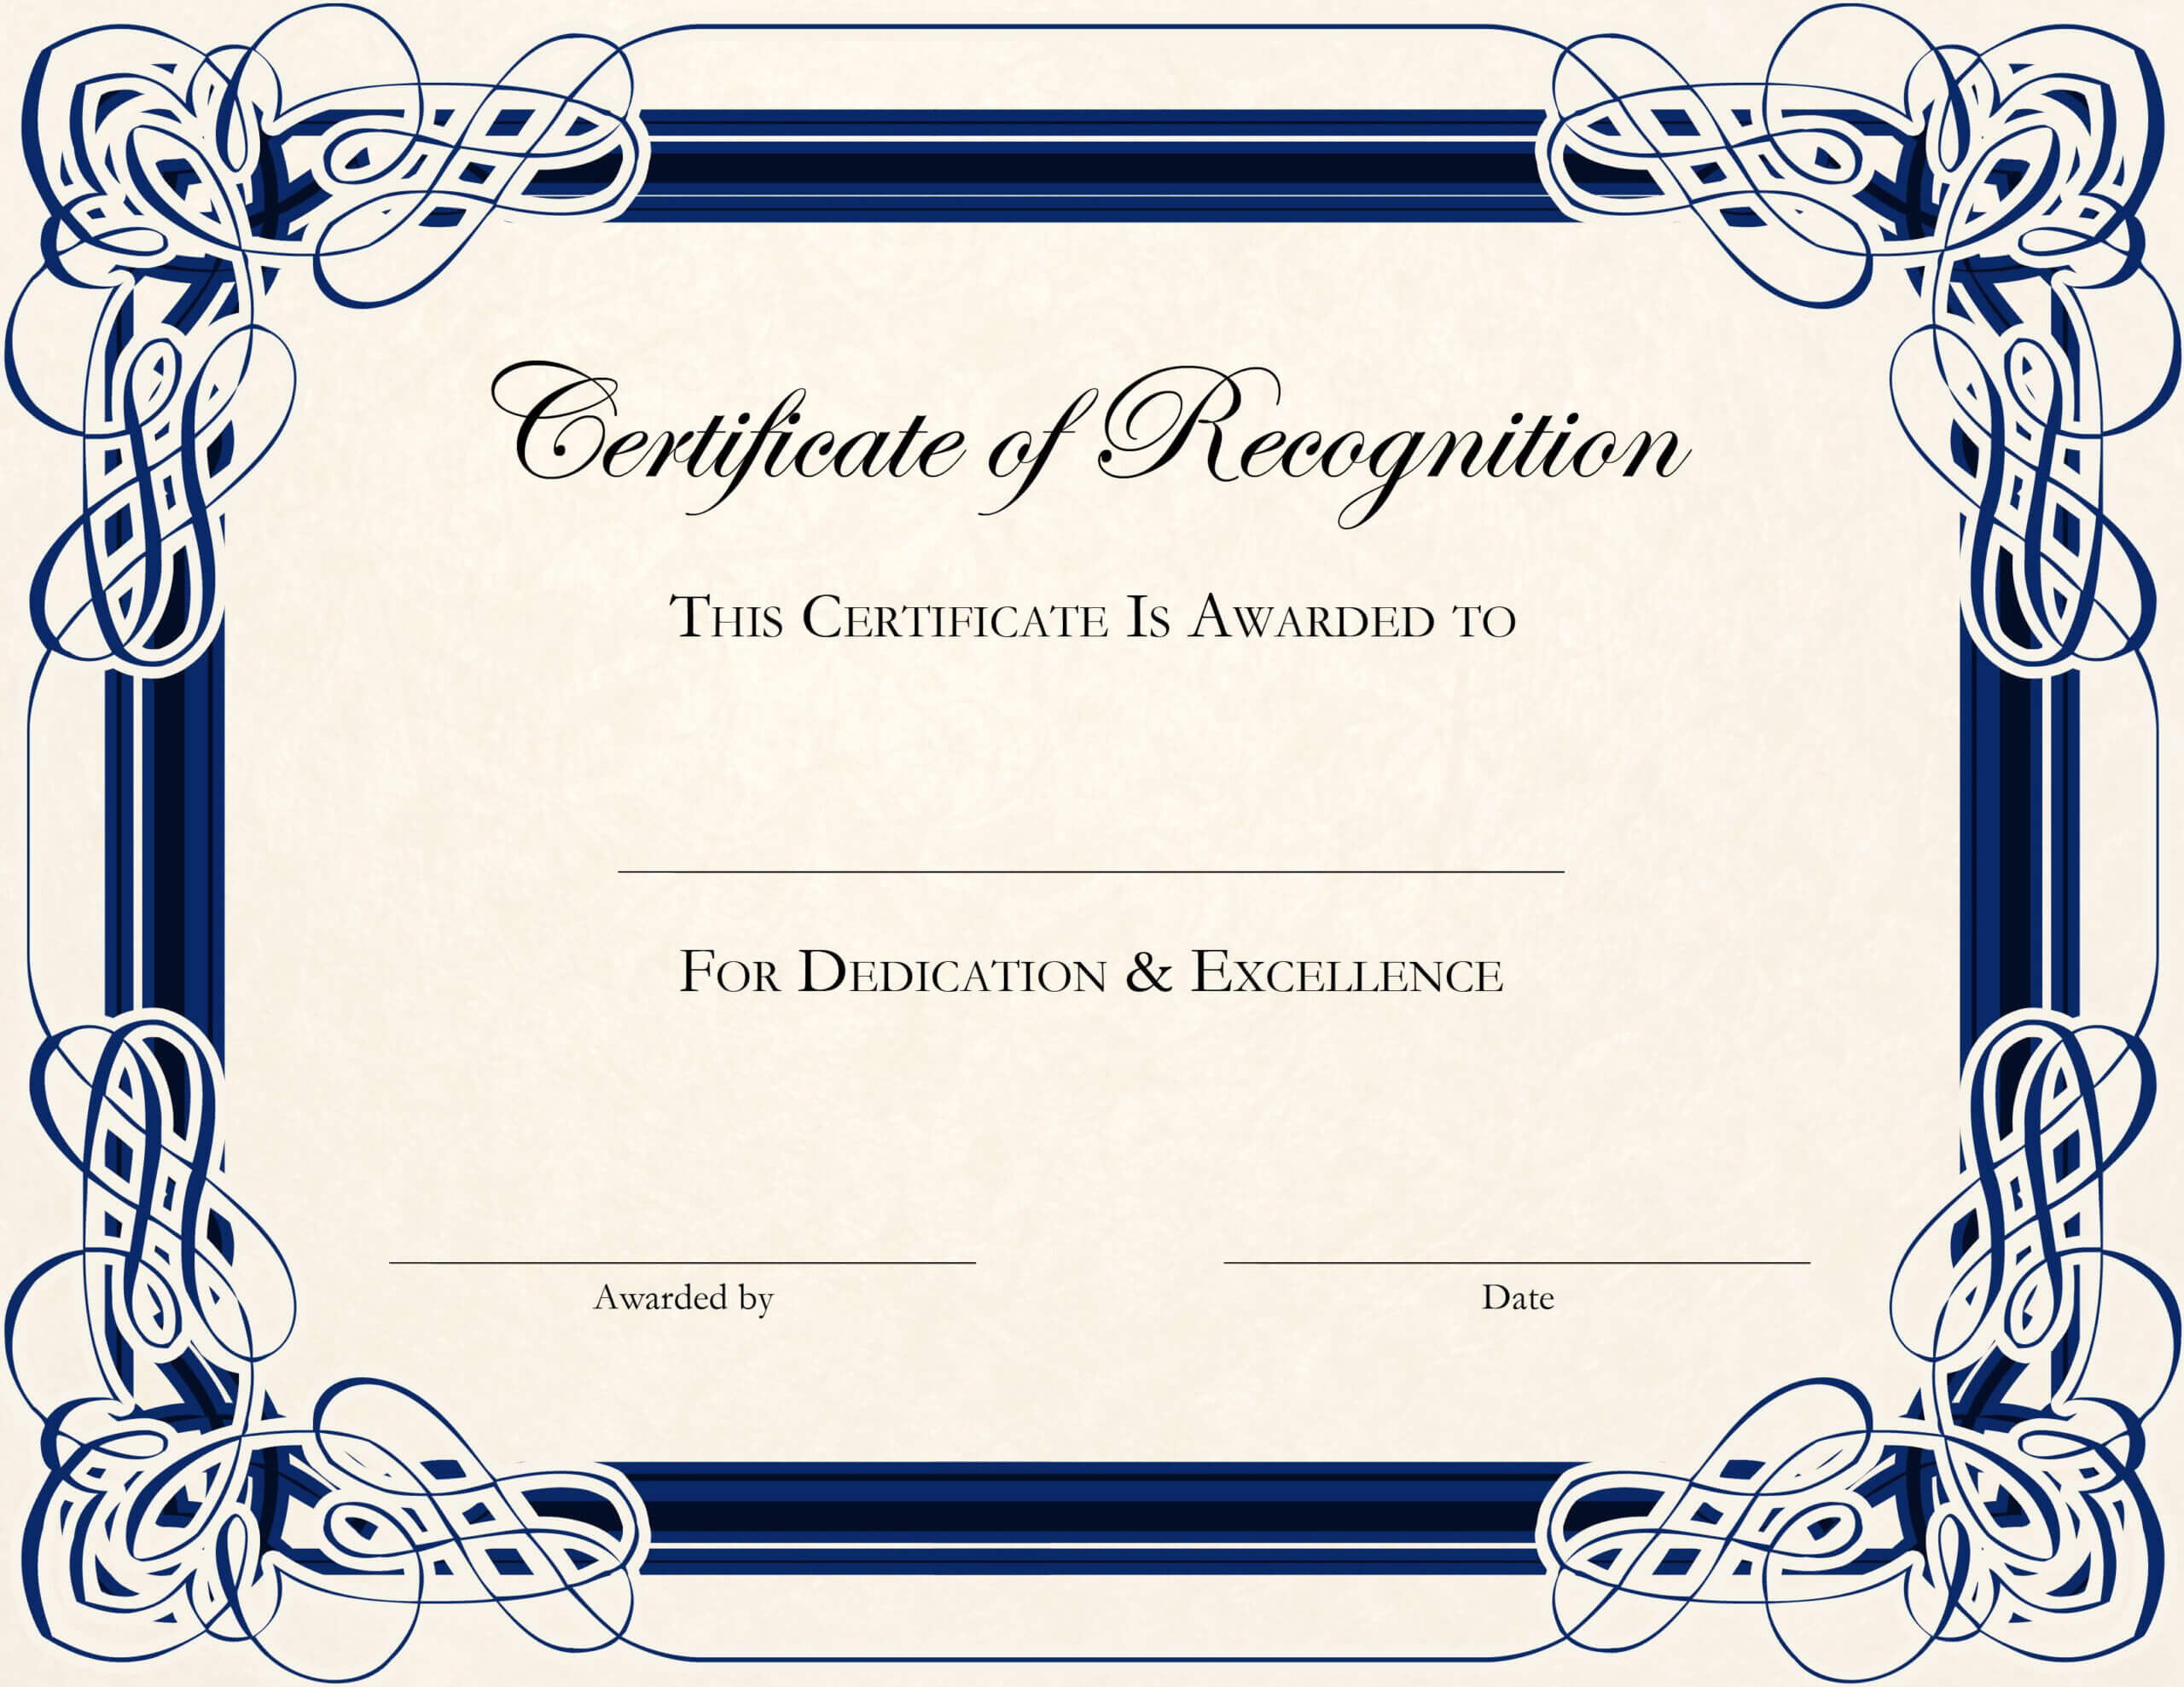 Certificate Template Designs Recognition Docs | Certificate With Regard To Sample Certificate Of Recognition Template